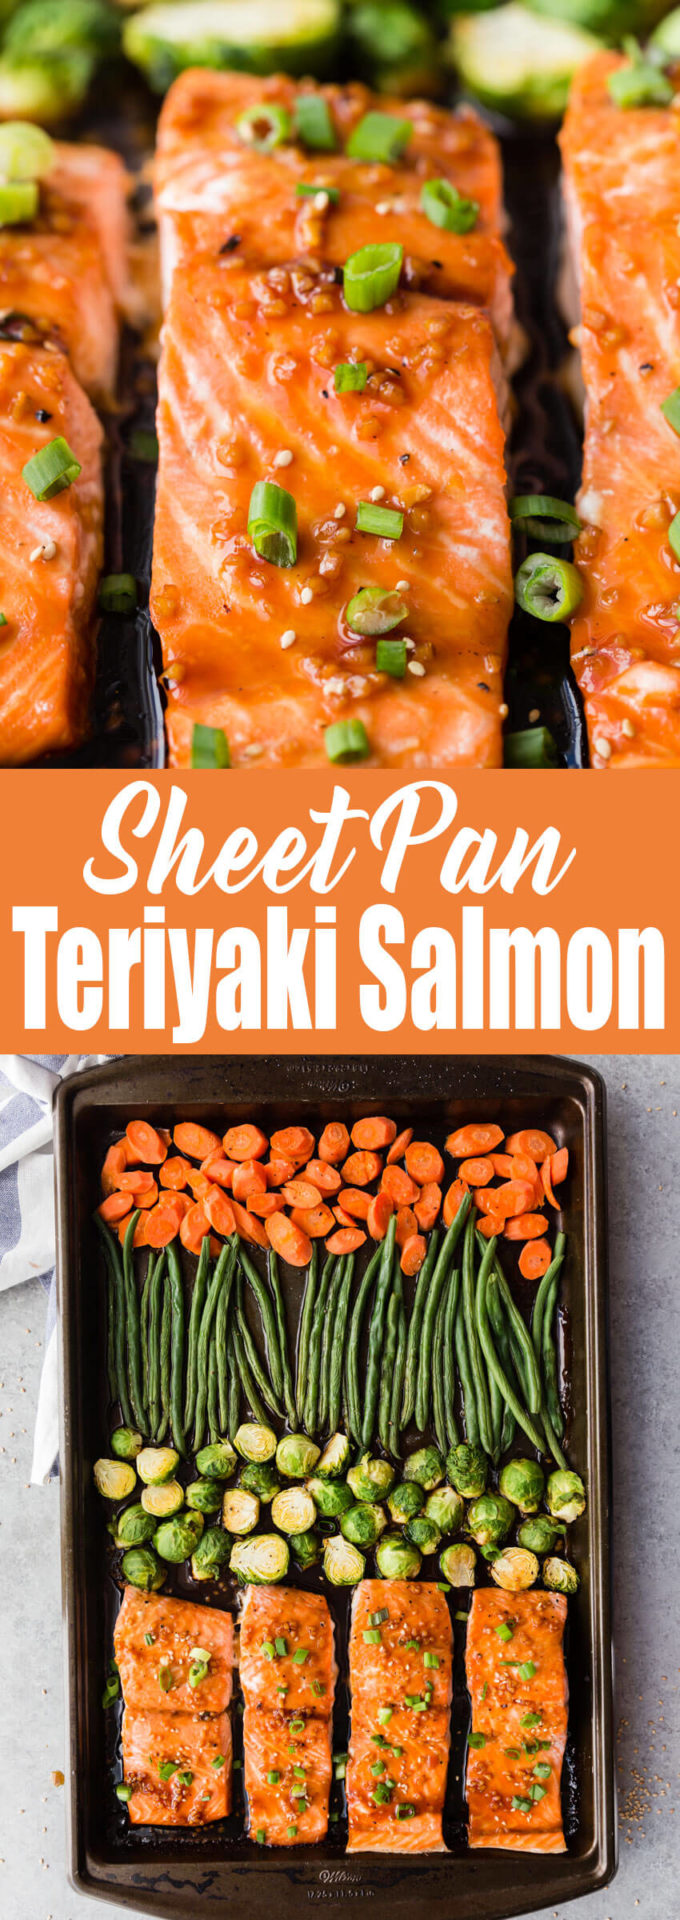 Teriyaki Salmon: An easy and flavorful meal prep dish with very little clean up! You get flaky, delightful salmon, and roasted veggies.